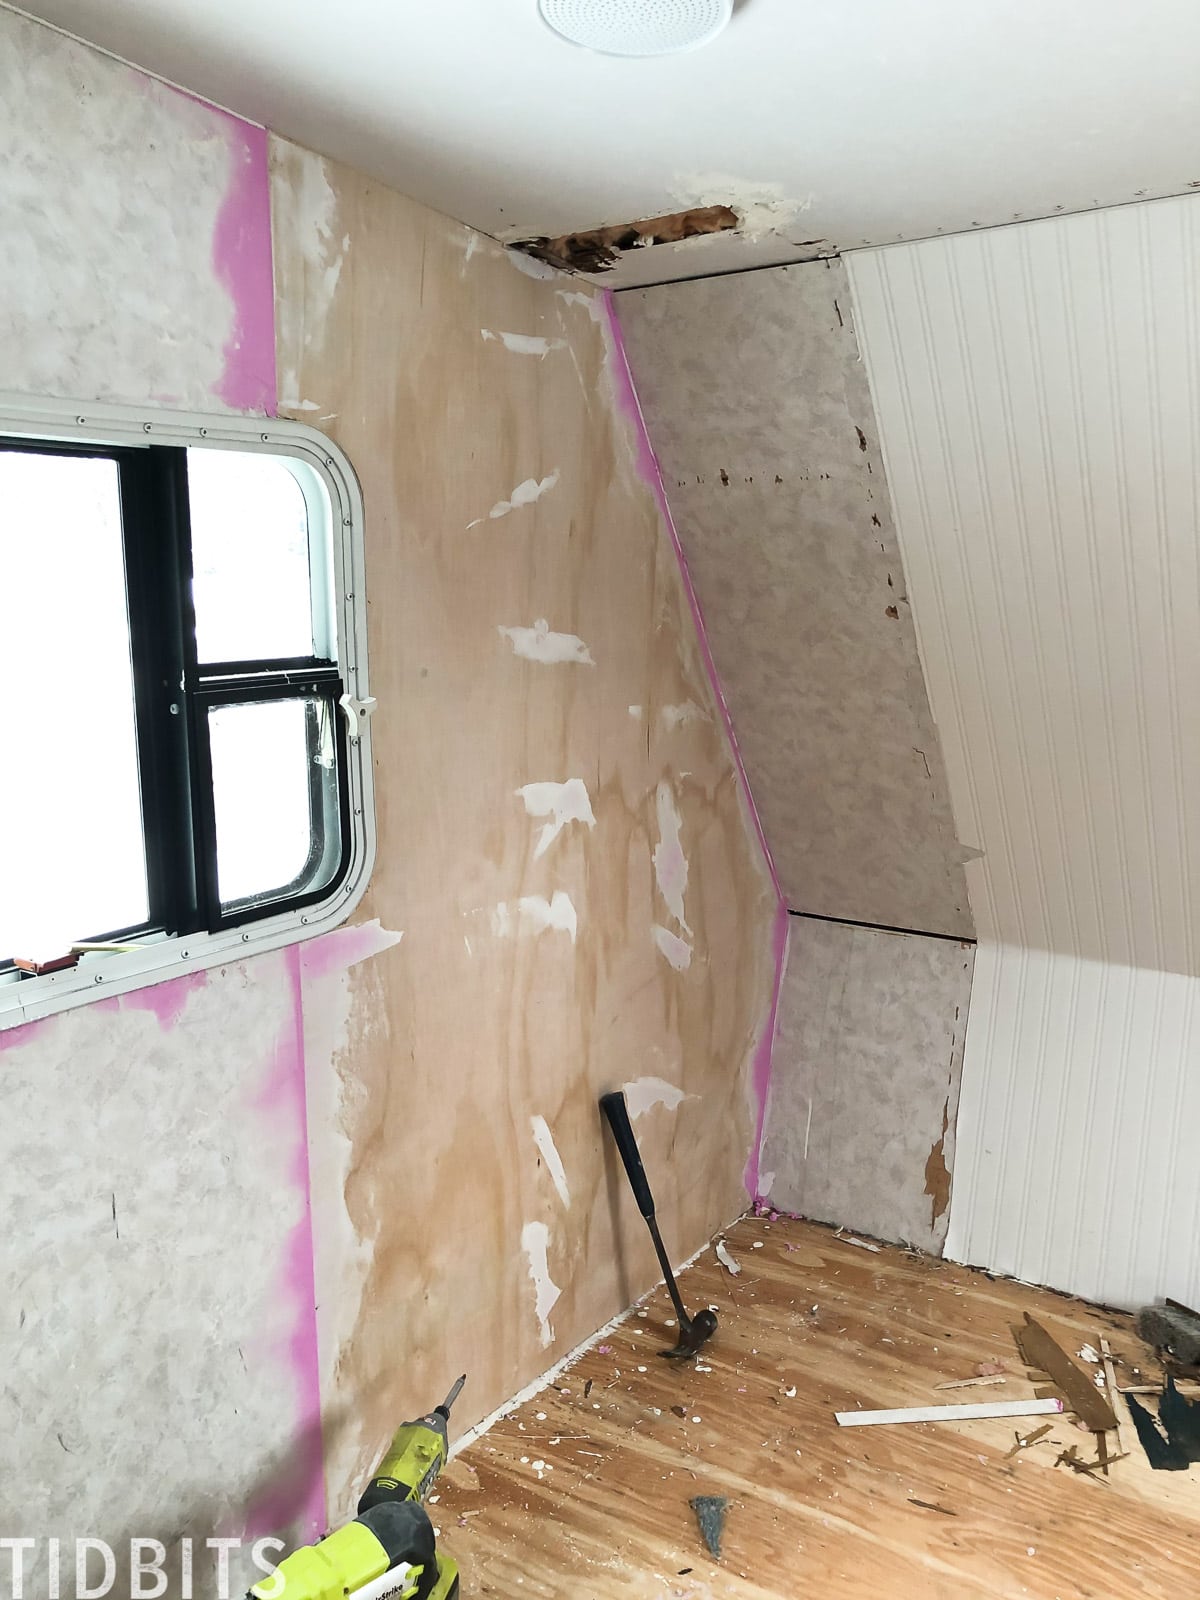 Water and mold damage in RV, solutions.